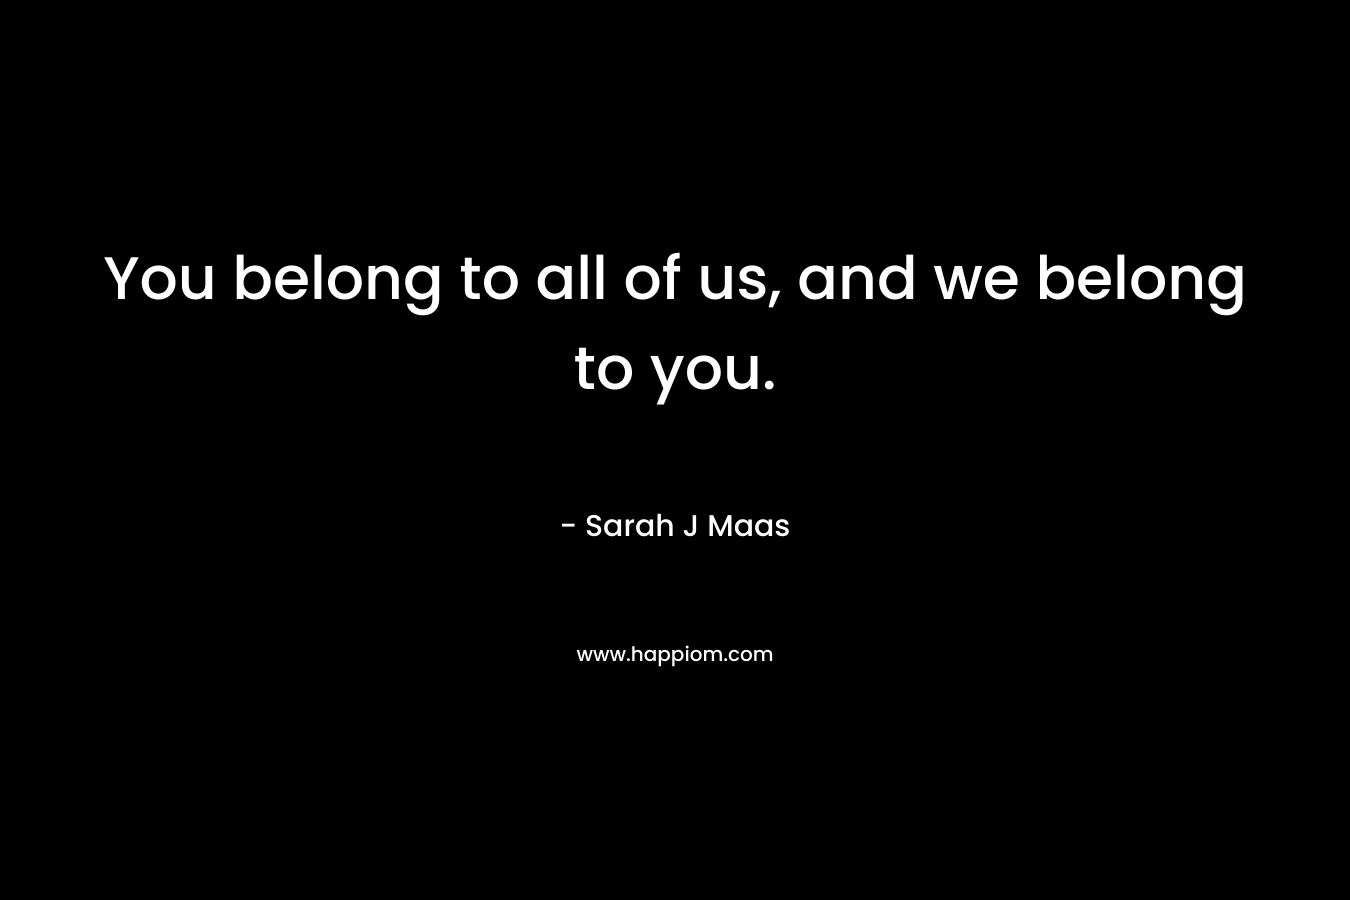 You belong to all of us, and we belong to you.